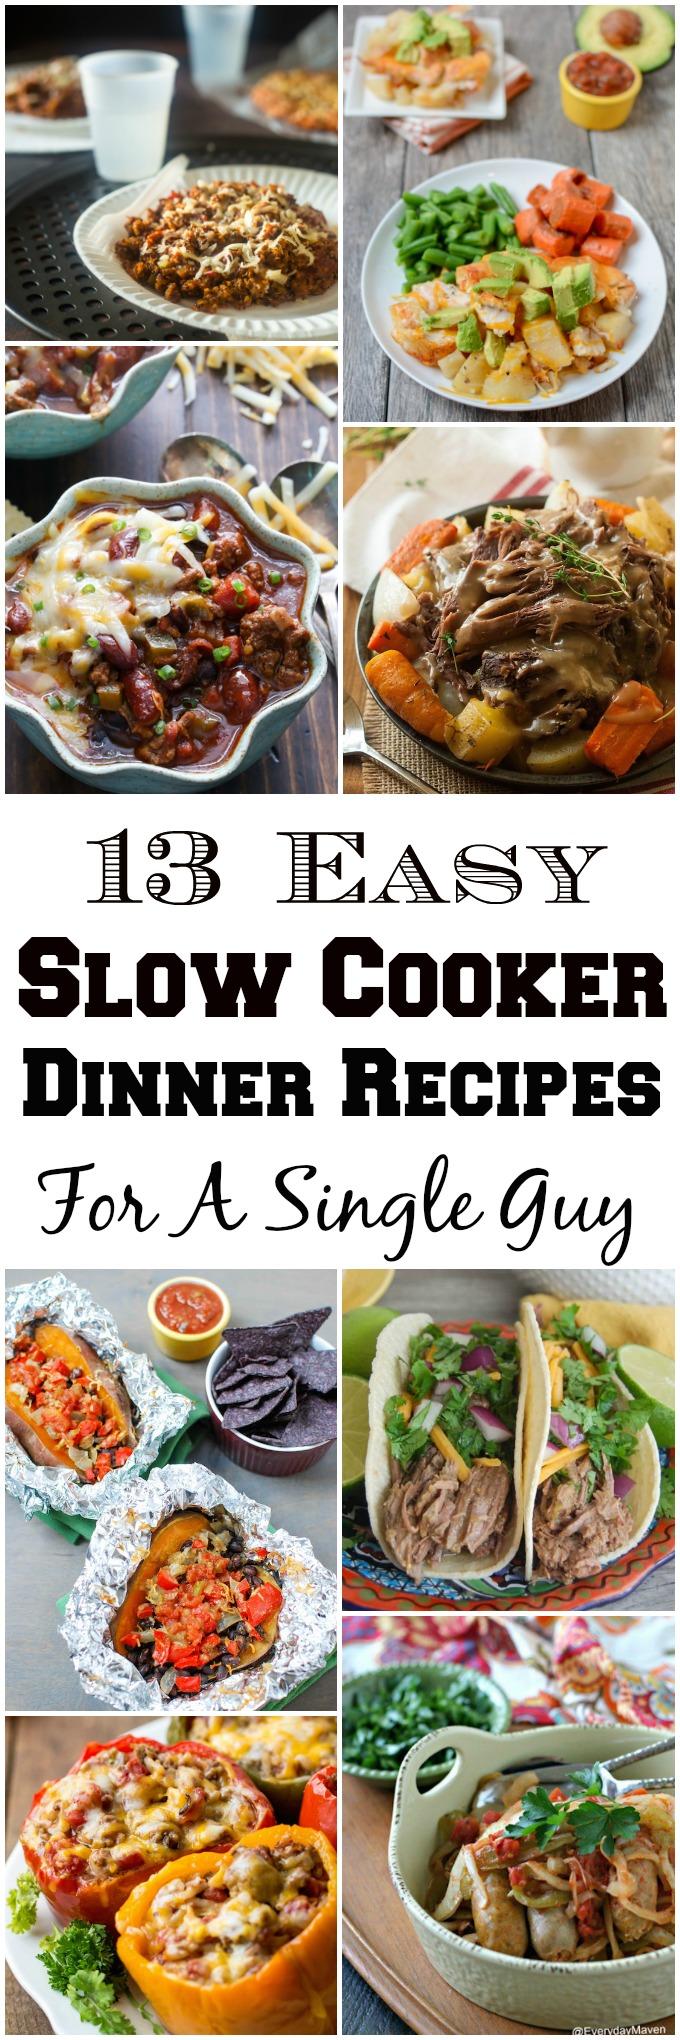 These Easy Slow Cooker Dinner Recipes For A Single Guy are hearty, nutritious and easy enough for even men who don't like to cook.